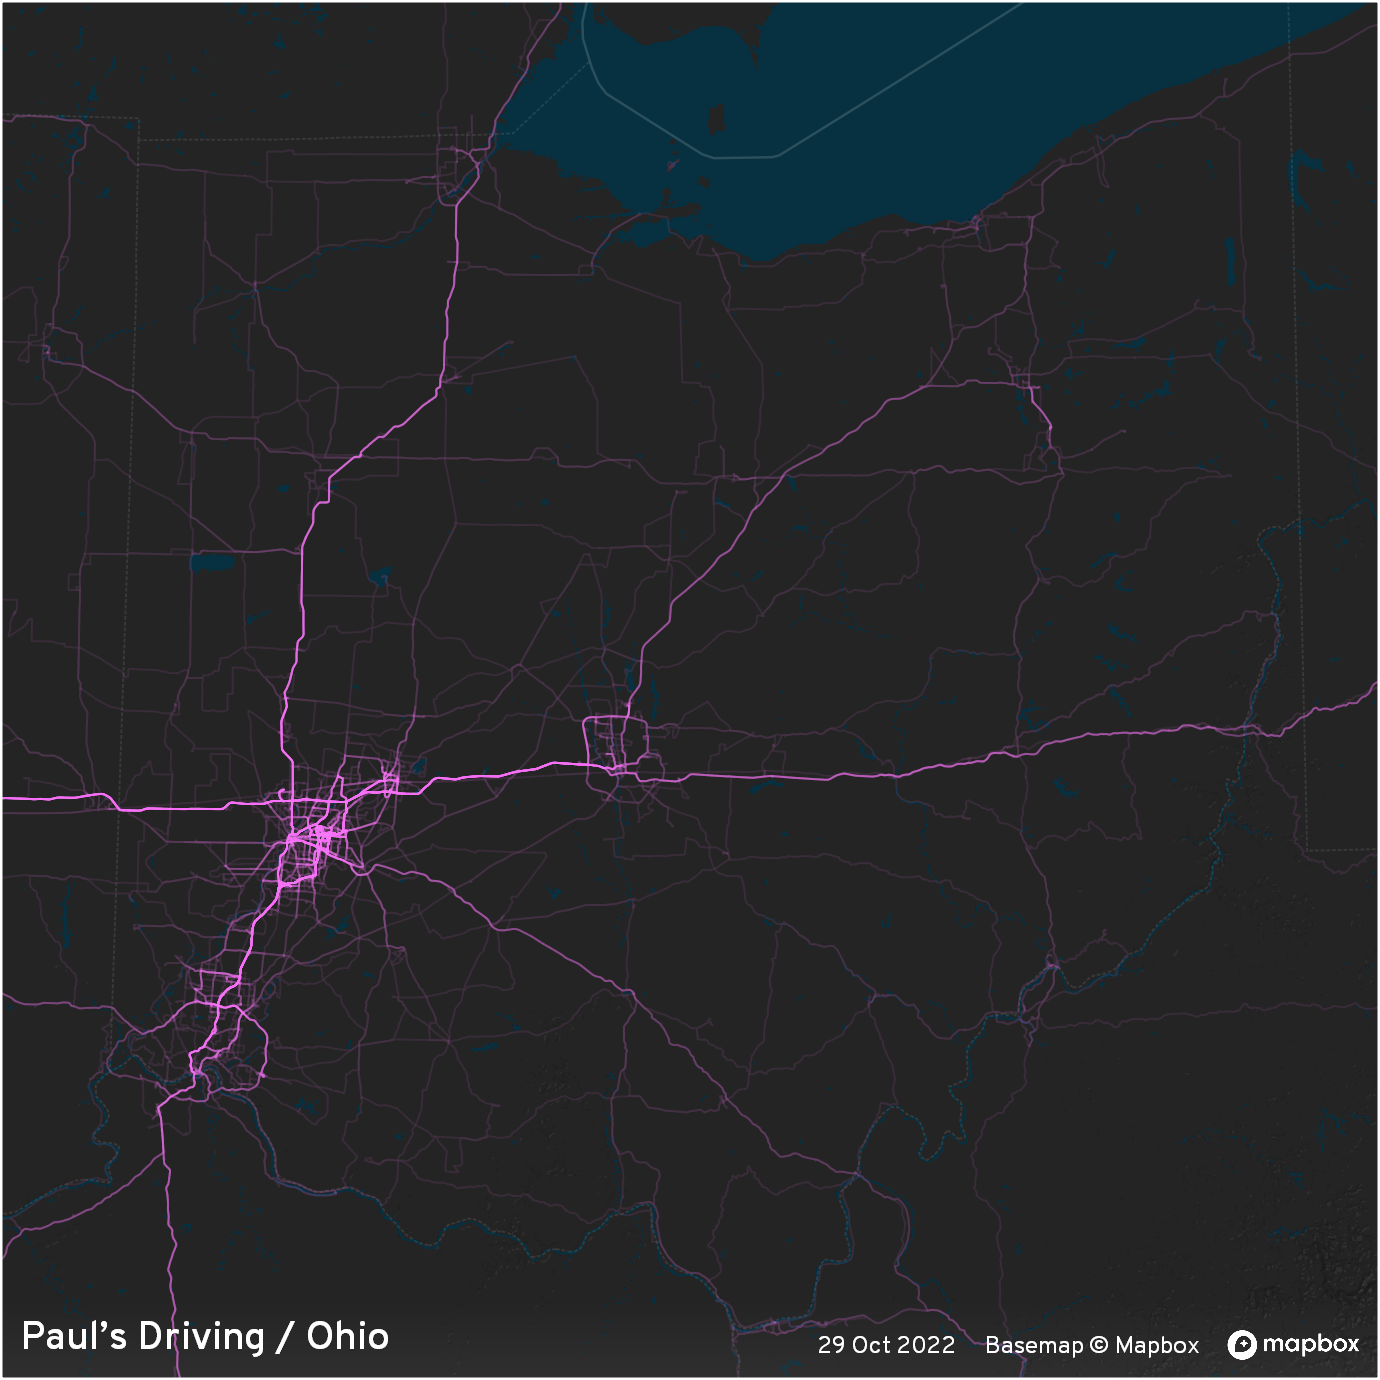 Driving density map of Ohio as of 29 Oct 2022.